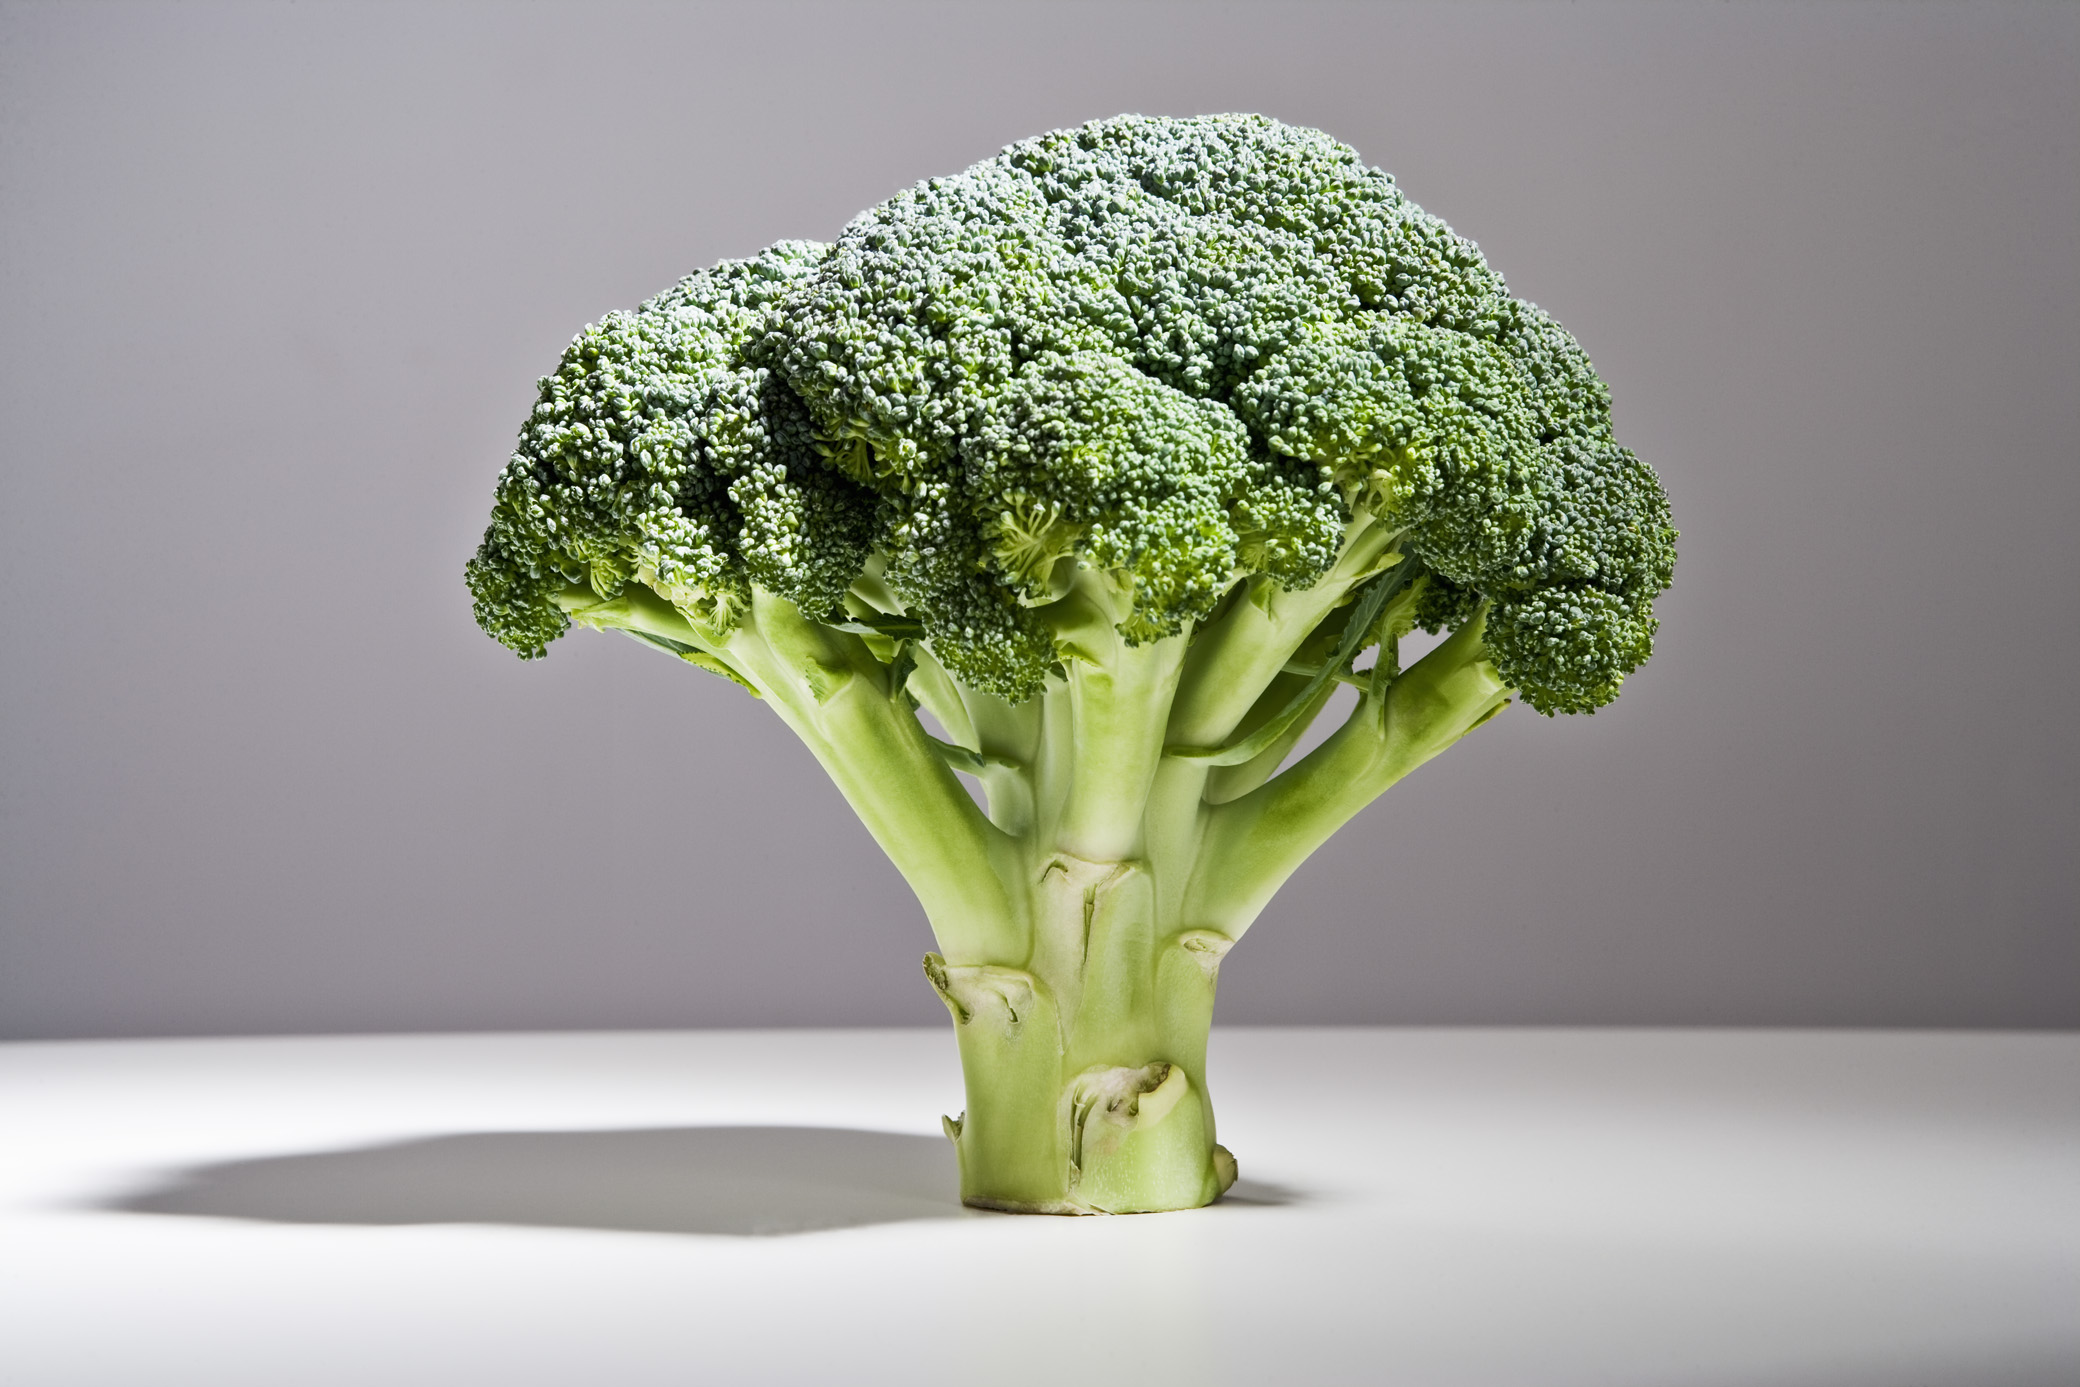 Food photographer - still life image of a florette of broccoli 